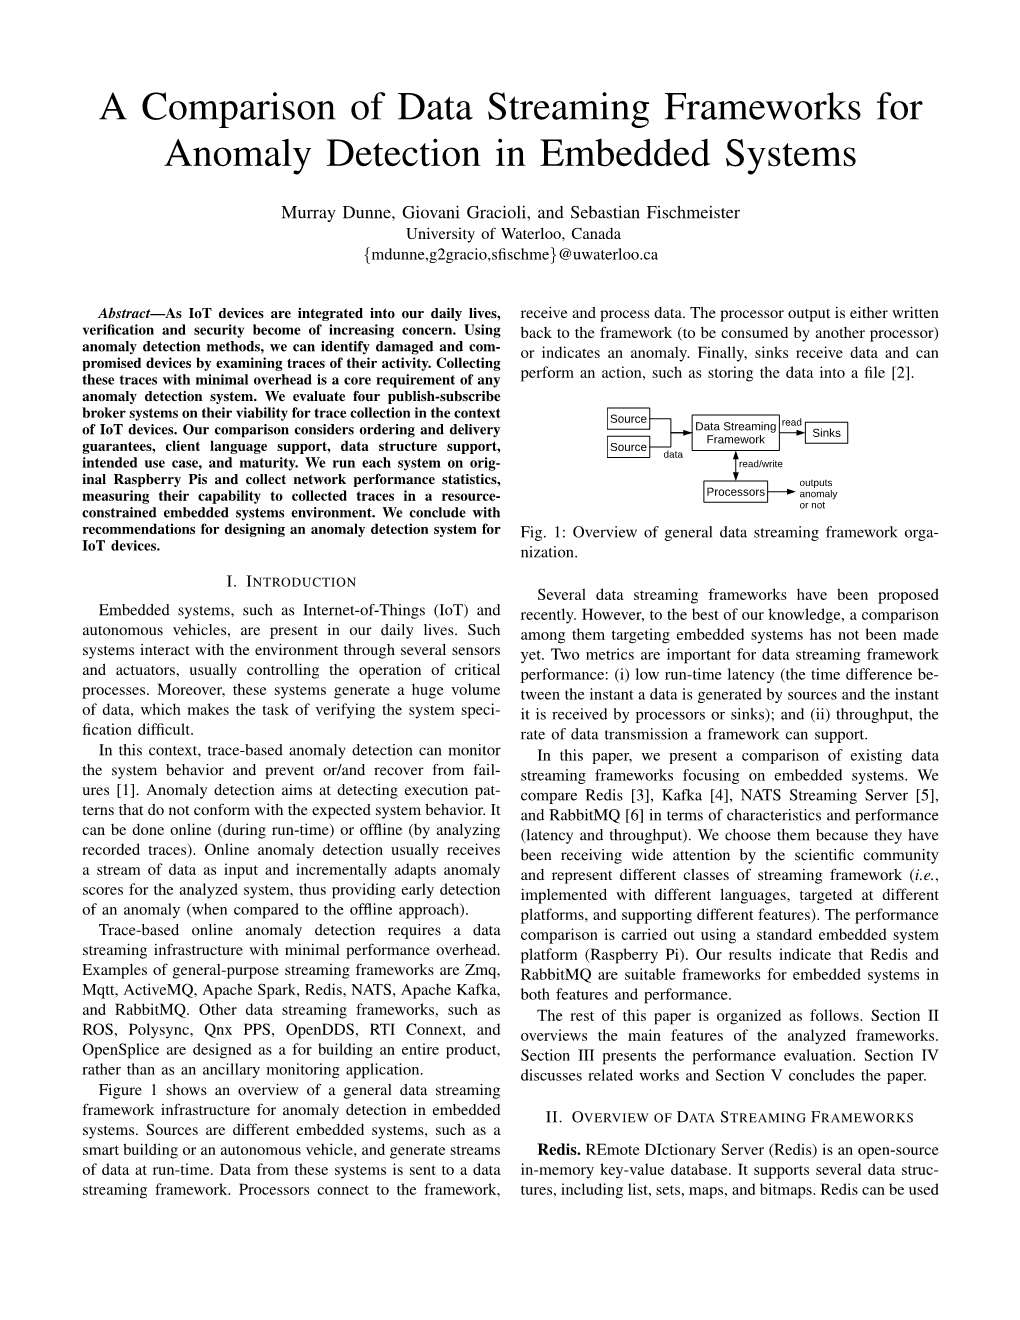 A Comparison of Data Streaming Frameworks for Anomaly Detection in Embedded Systems